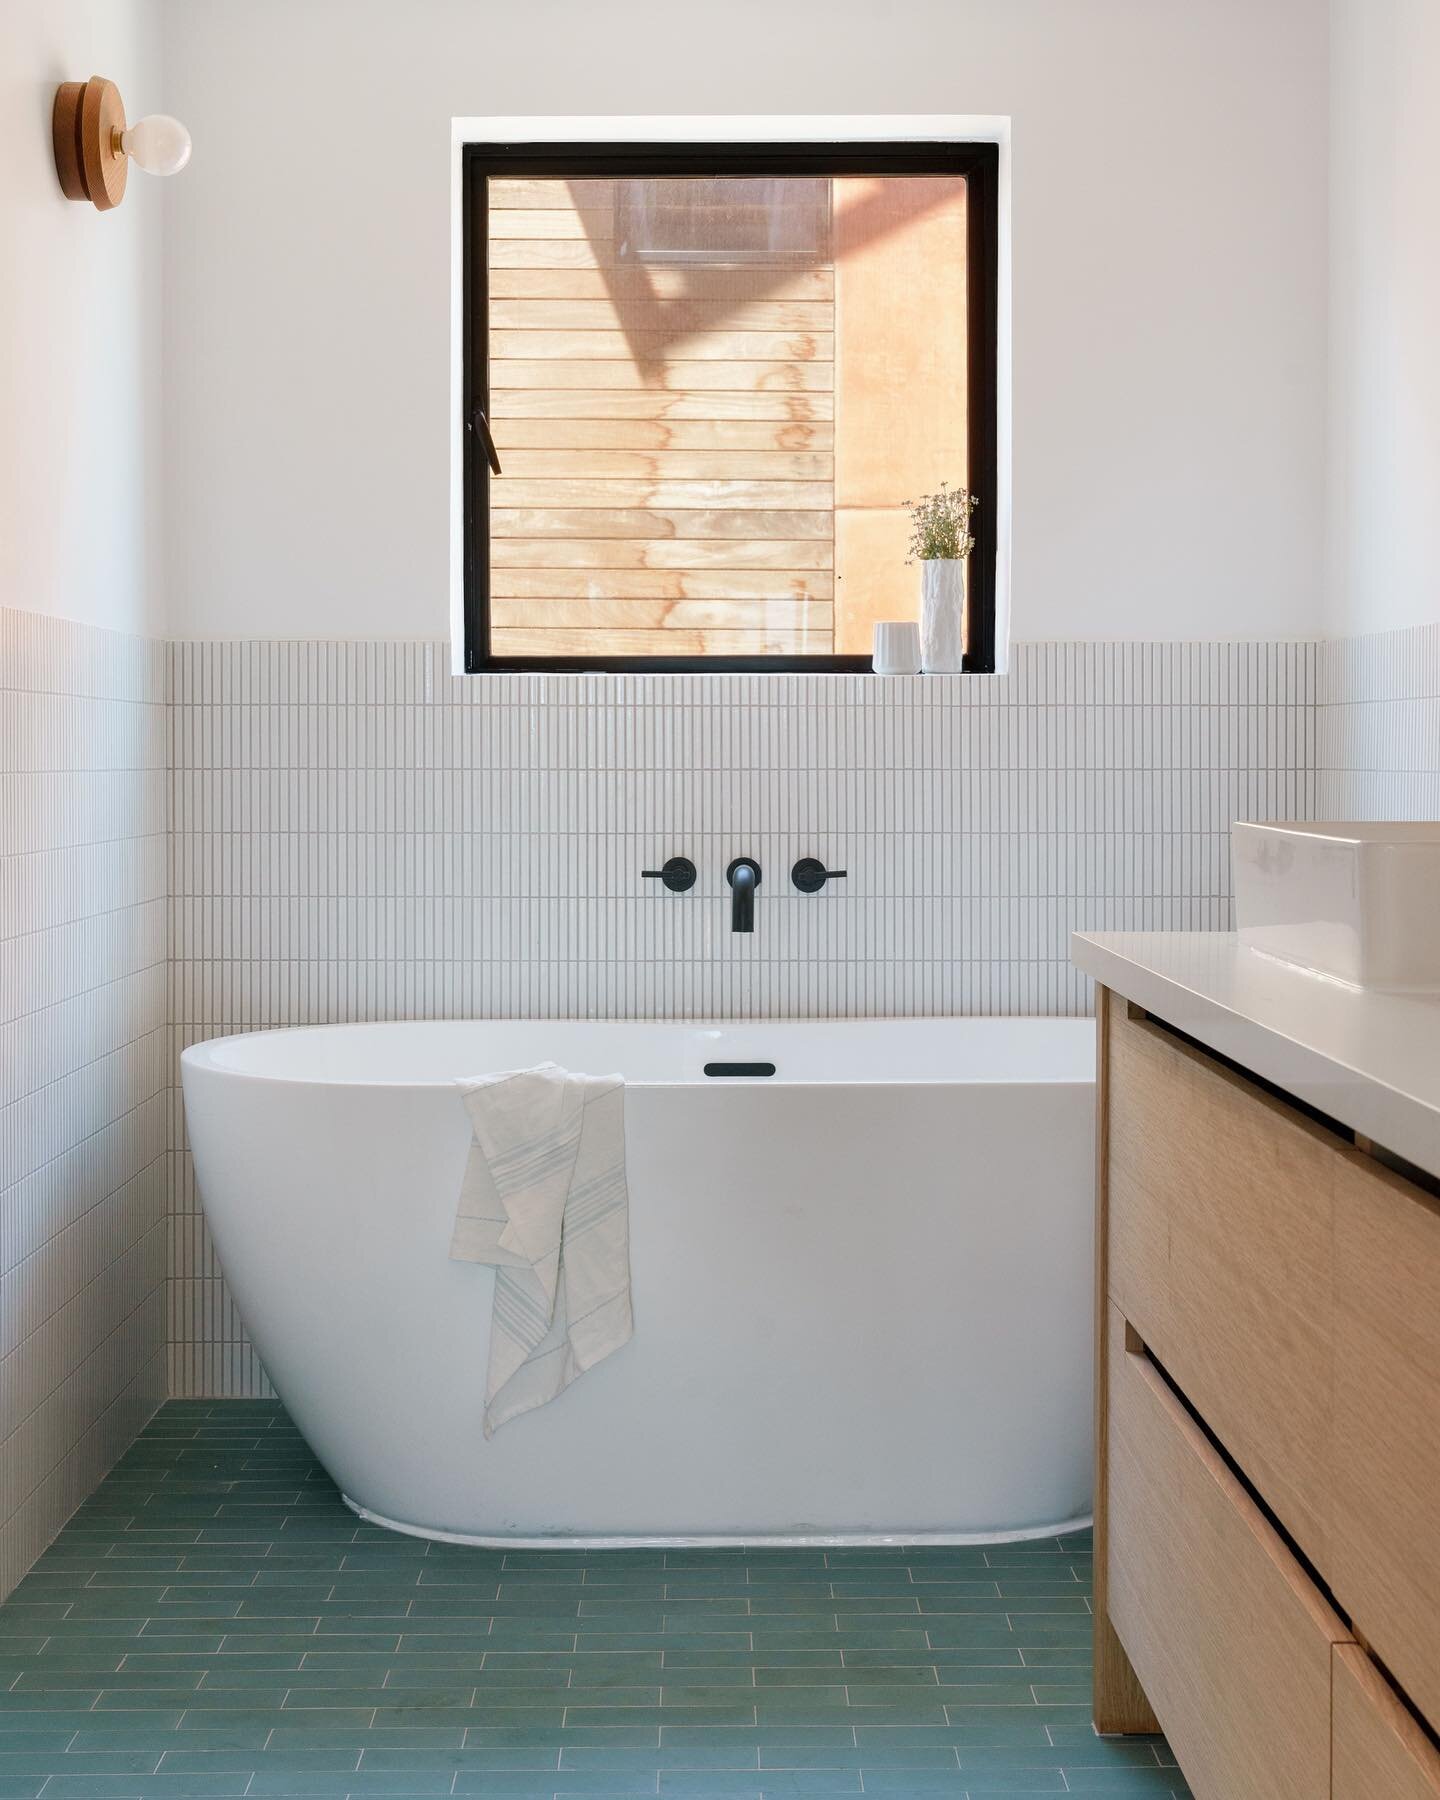 Rub a dub dub 🧼🫧🛁
.
📸 by @charlotteleaphotography 
Design by Popix Designs
Construction by @indconstruction